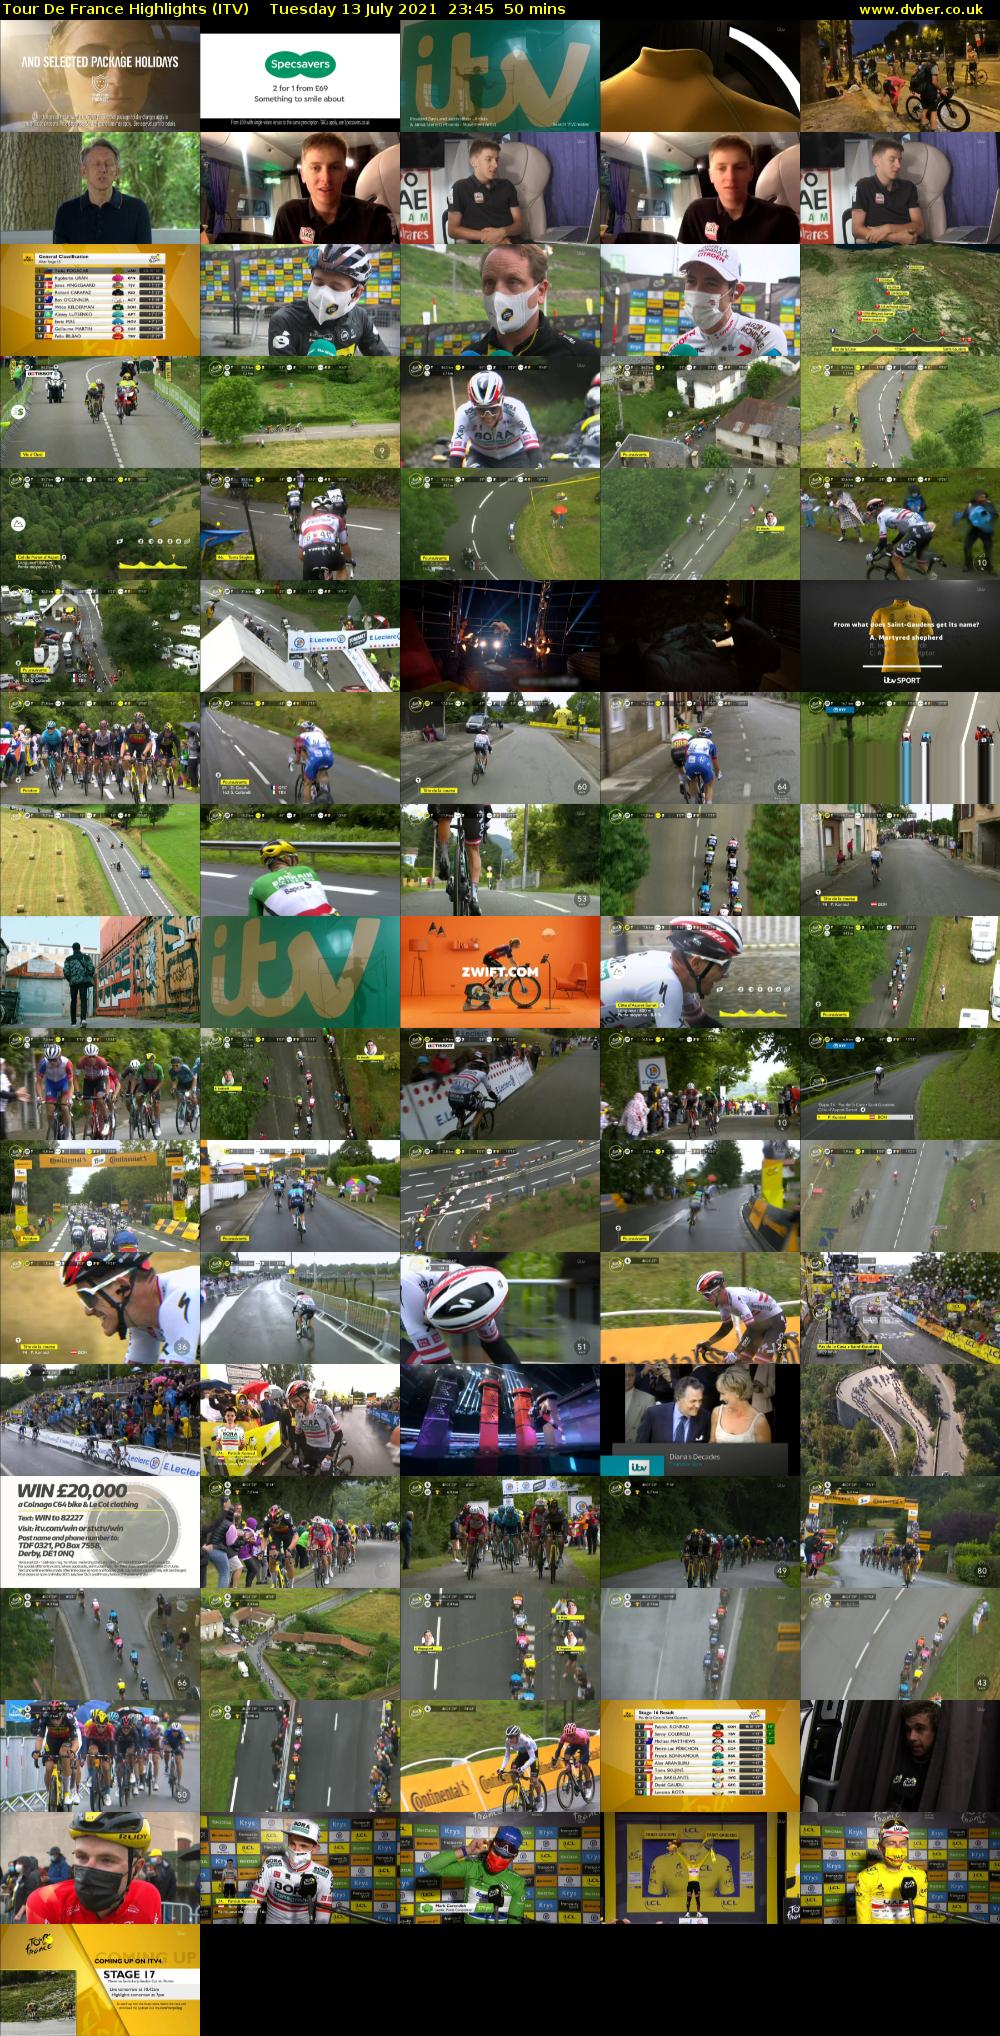 Tour De France Highlights (ITV) Tuesday 13 July 2021 23:45 - 00:35